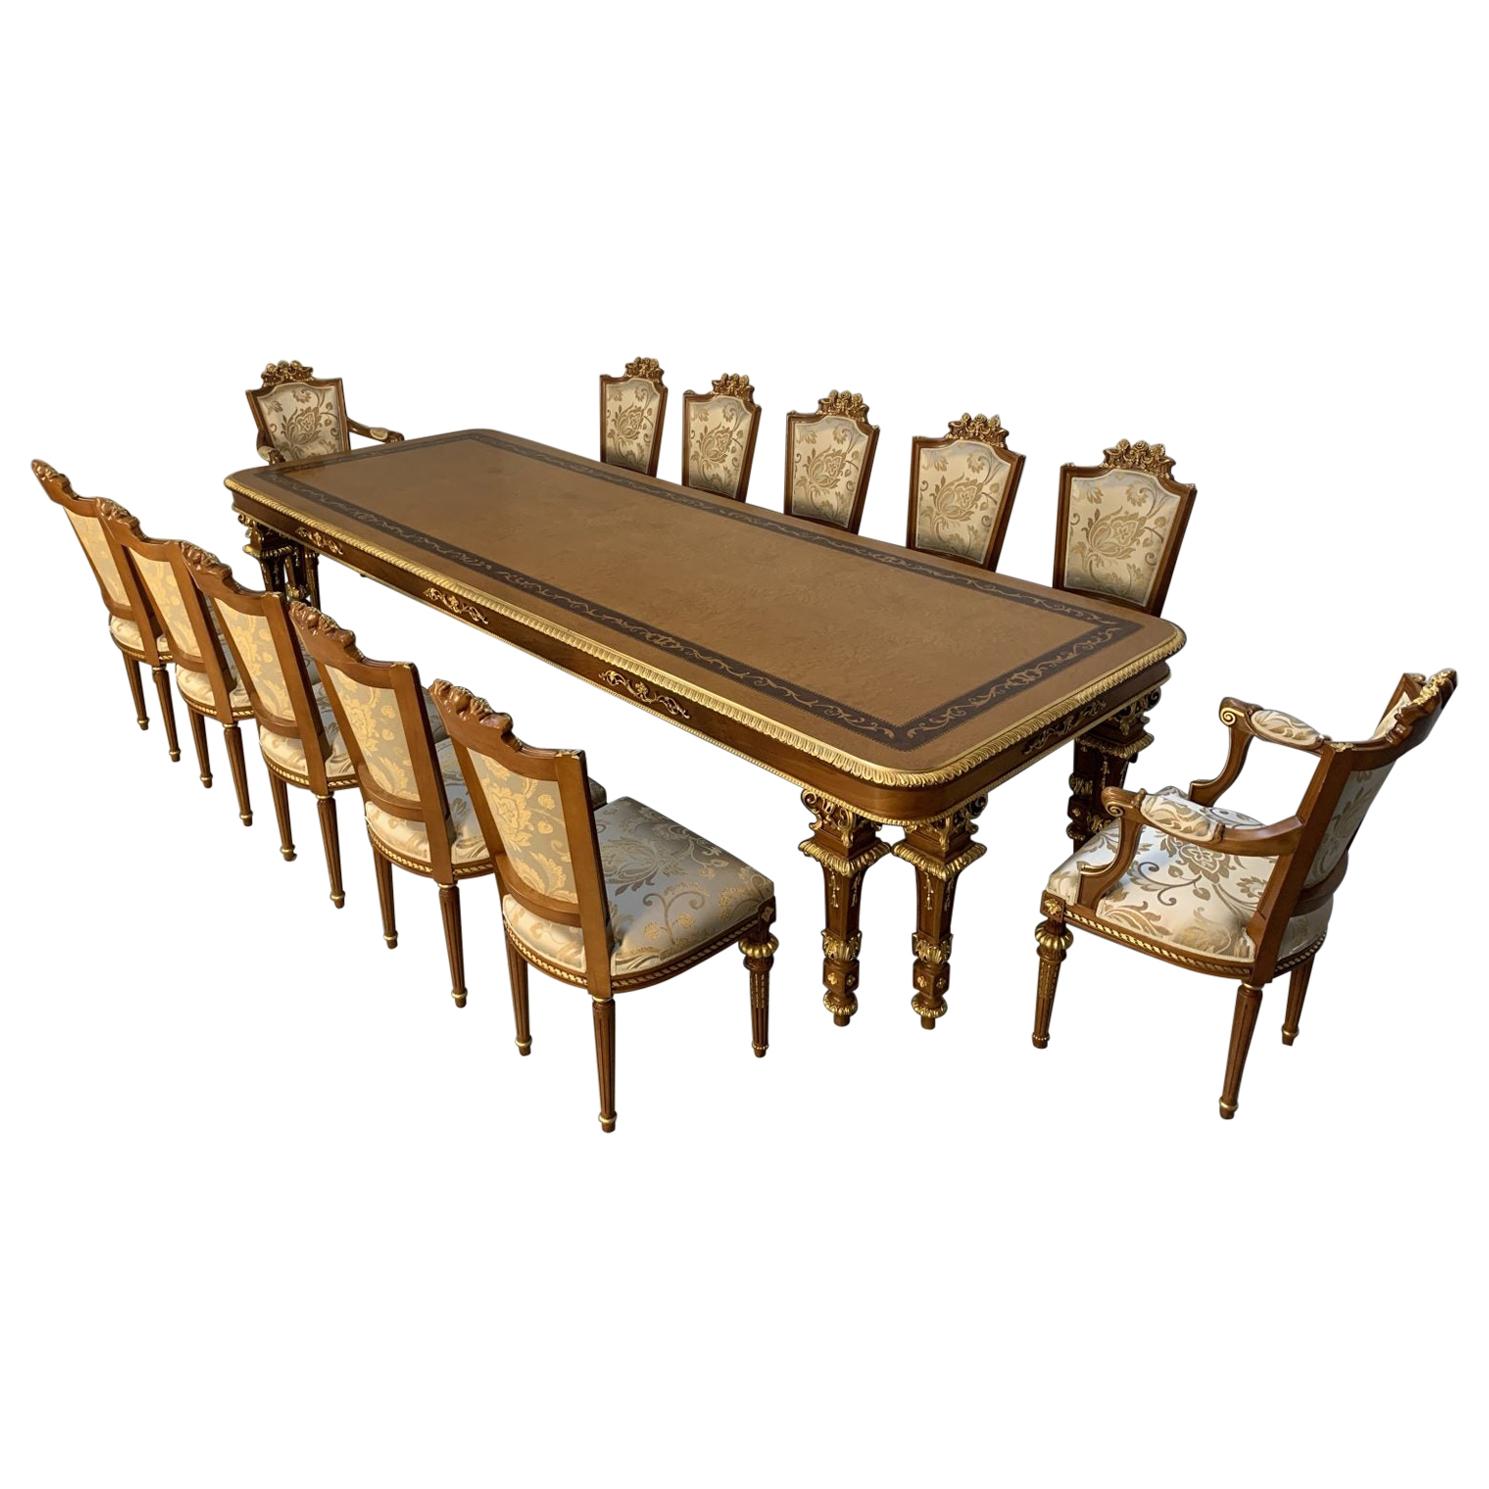 Asnaghi “Eubea” Dining Table and 12 Chair Suite in Harwood, Gilt and Silk For Sale